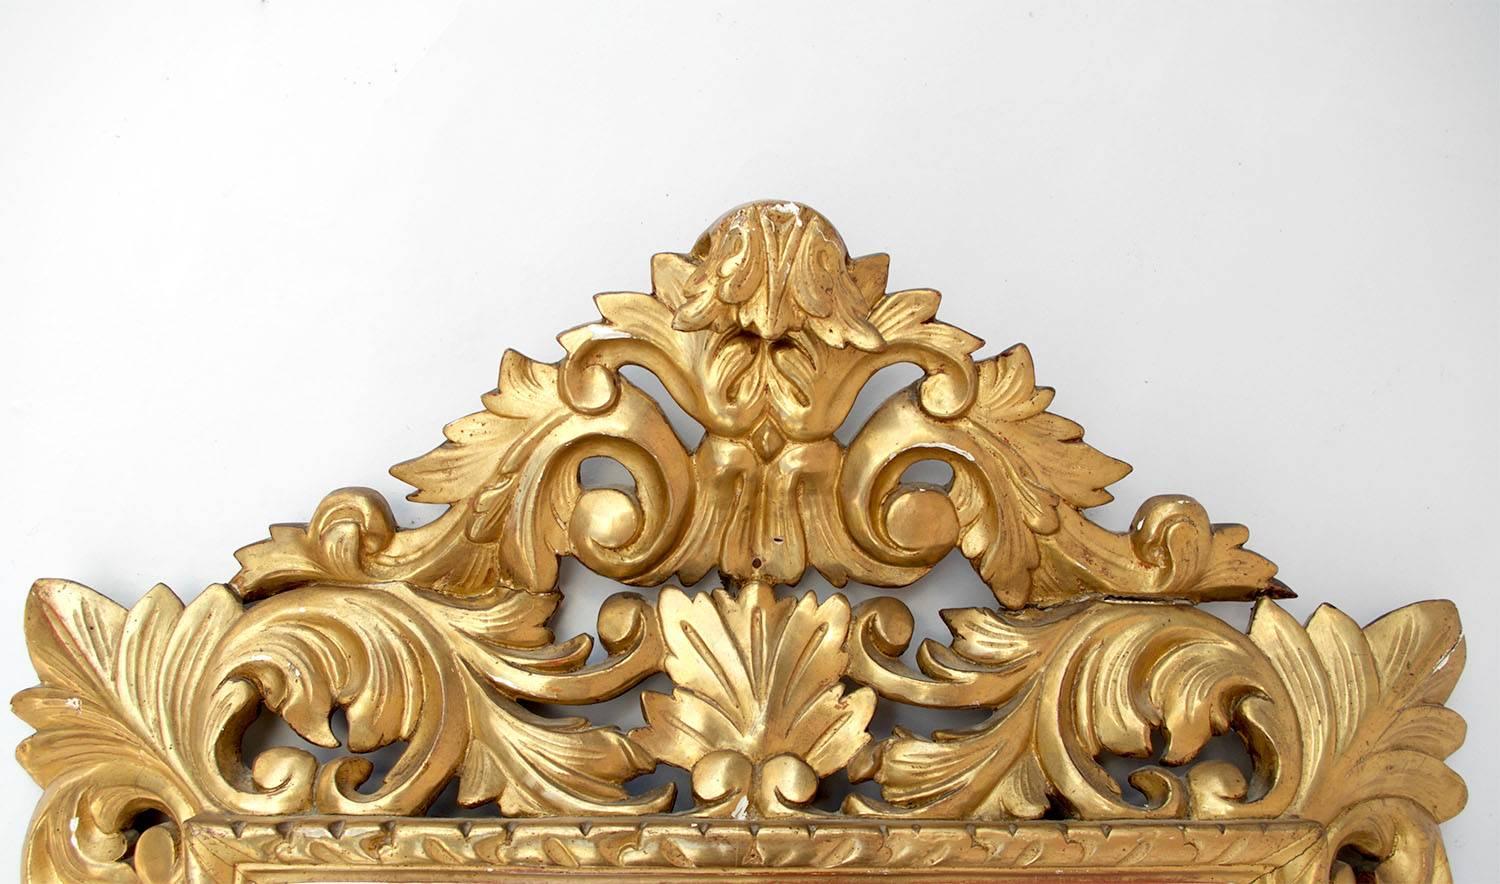 Small rectangular carved and giltwood beveled mirror, Louis XIII style model with a fronton. Decorated with acanthus leaves and swirls.
Work from the late 19th century, circa 1870.
Very good condition, some visible marks. Wear consistent with use